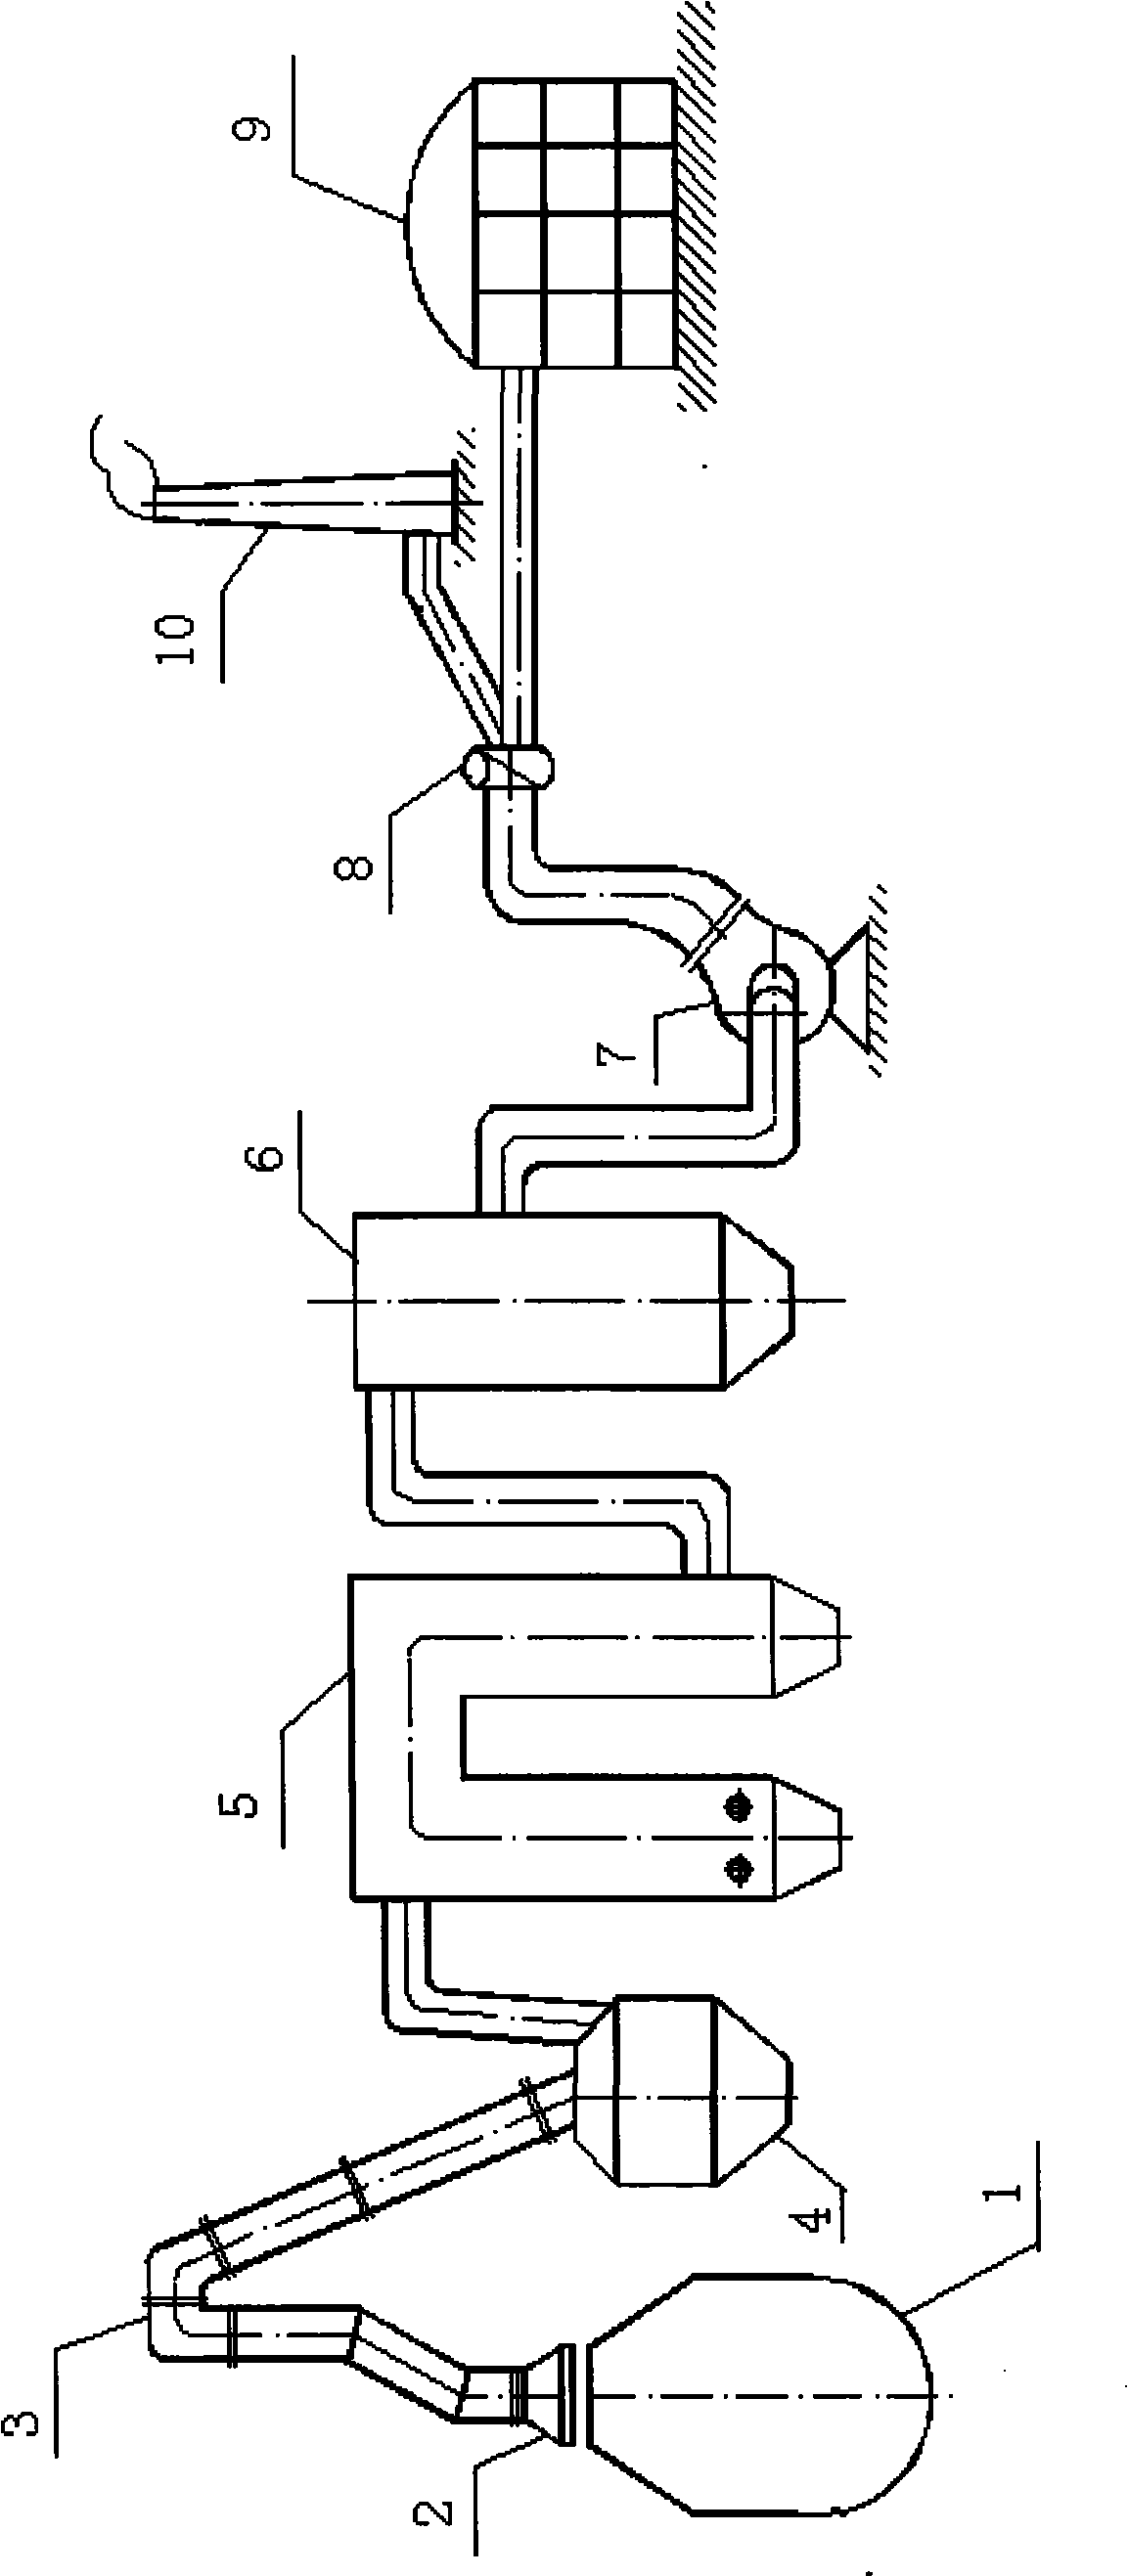 Full dry purification and residual heat utilization equipment and method for converter gas